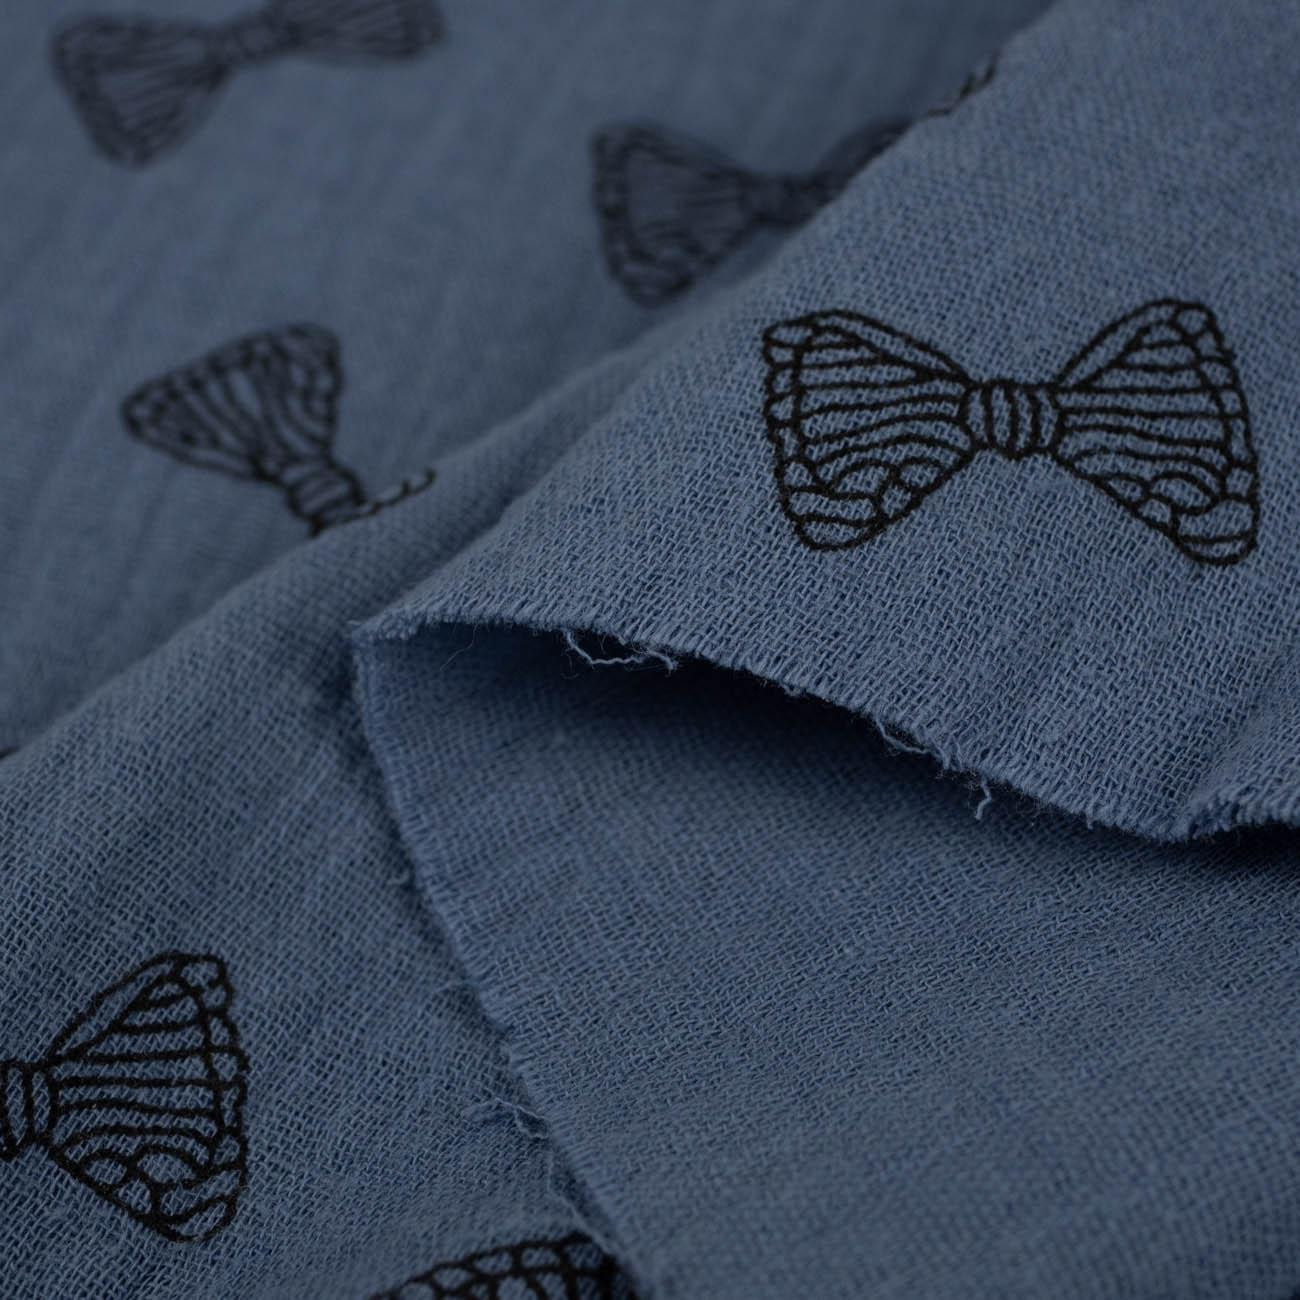 BOW TIE / muted blue - cotton muslin